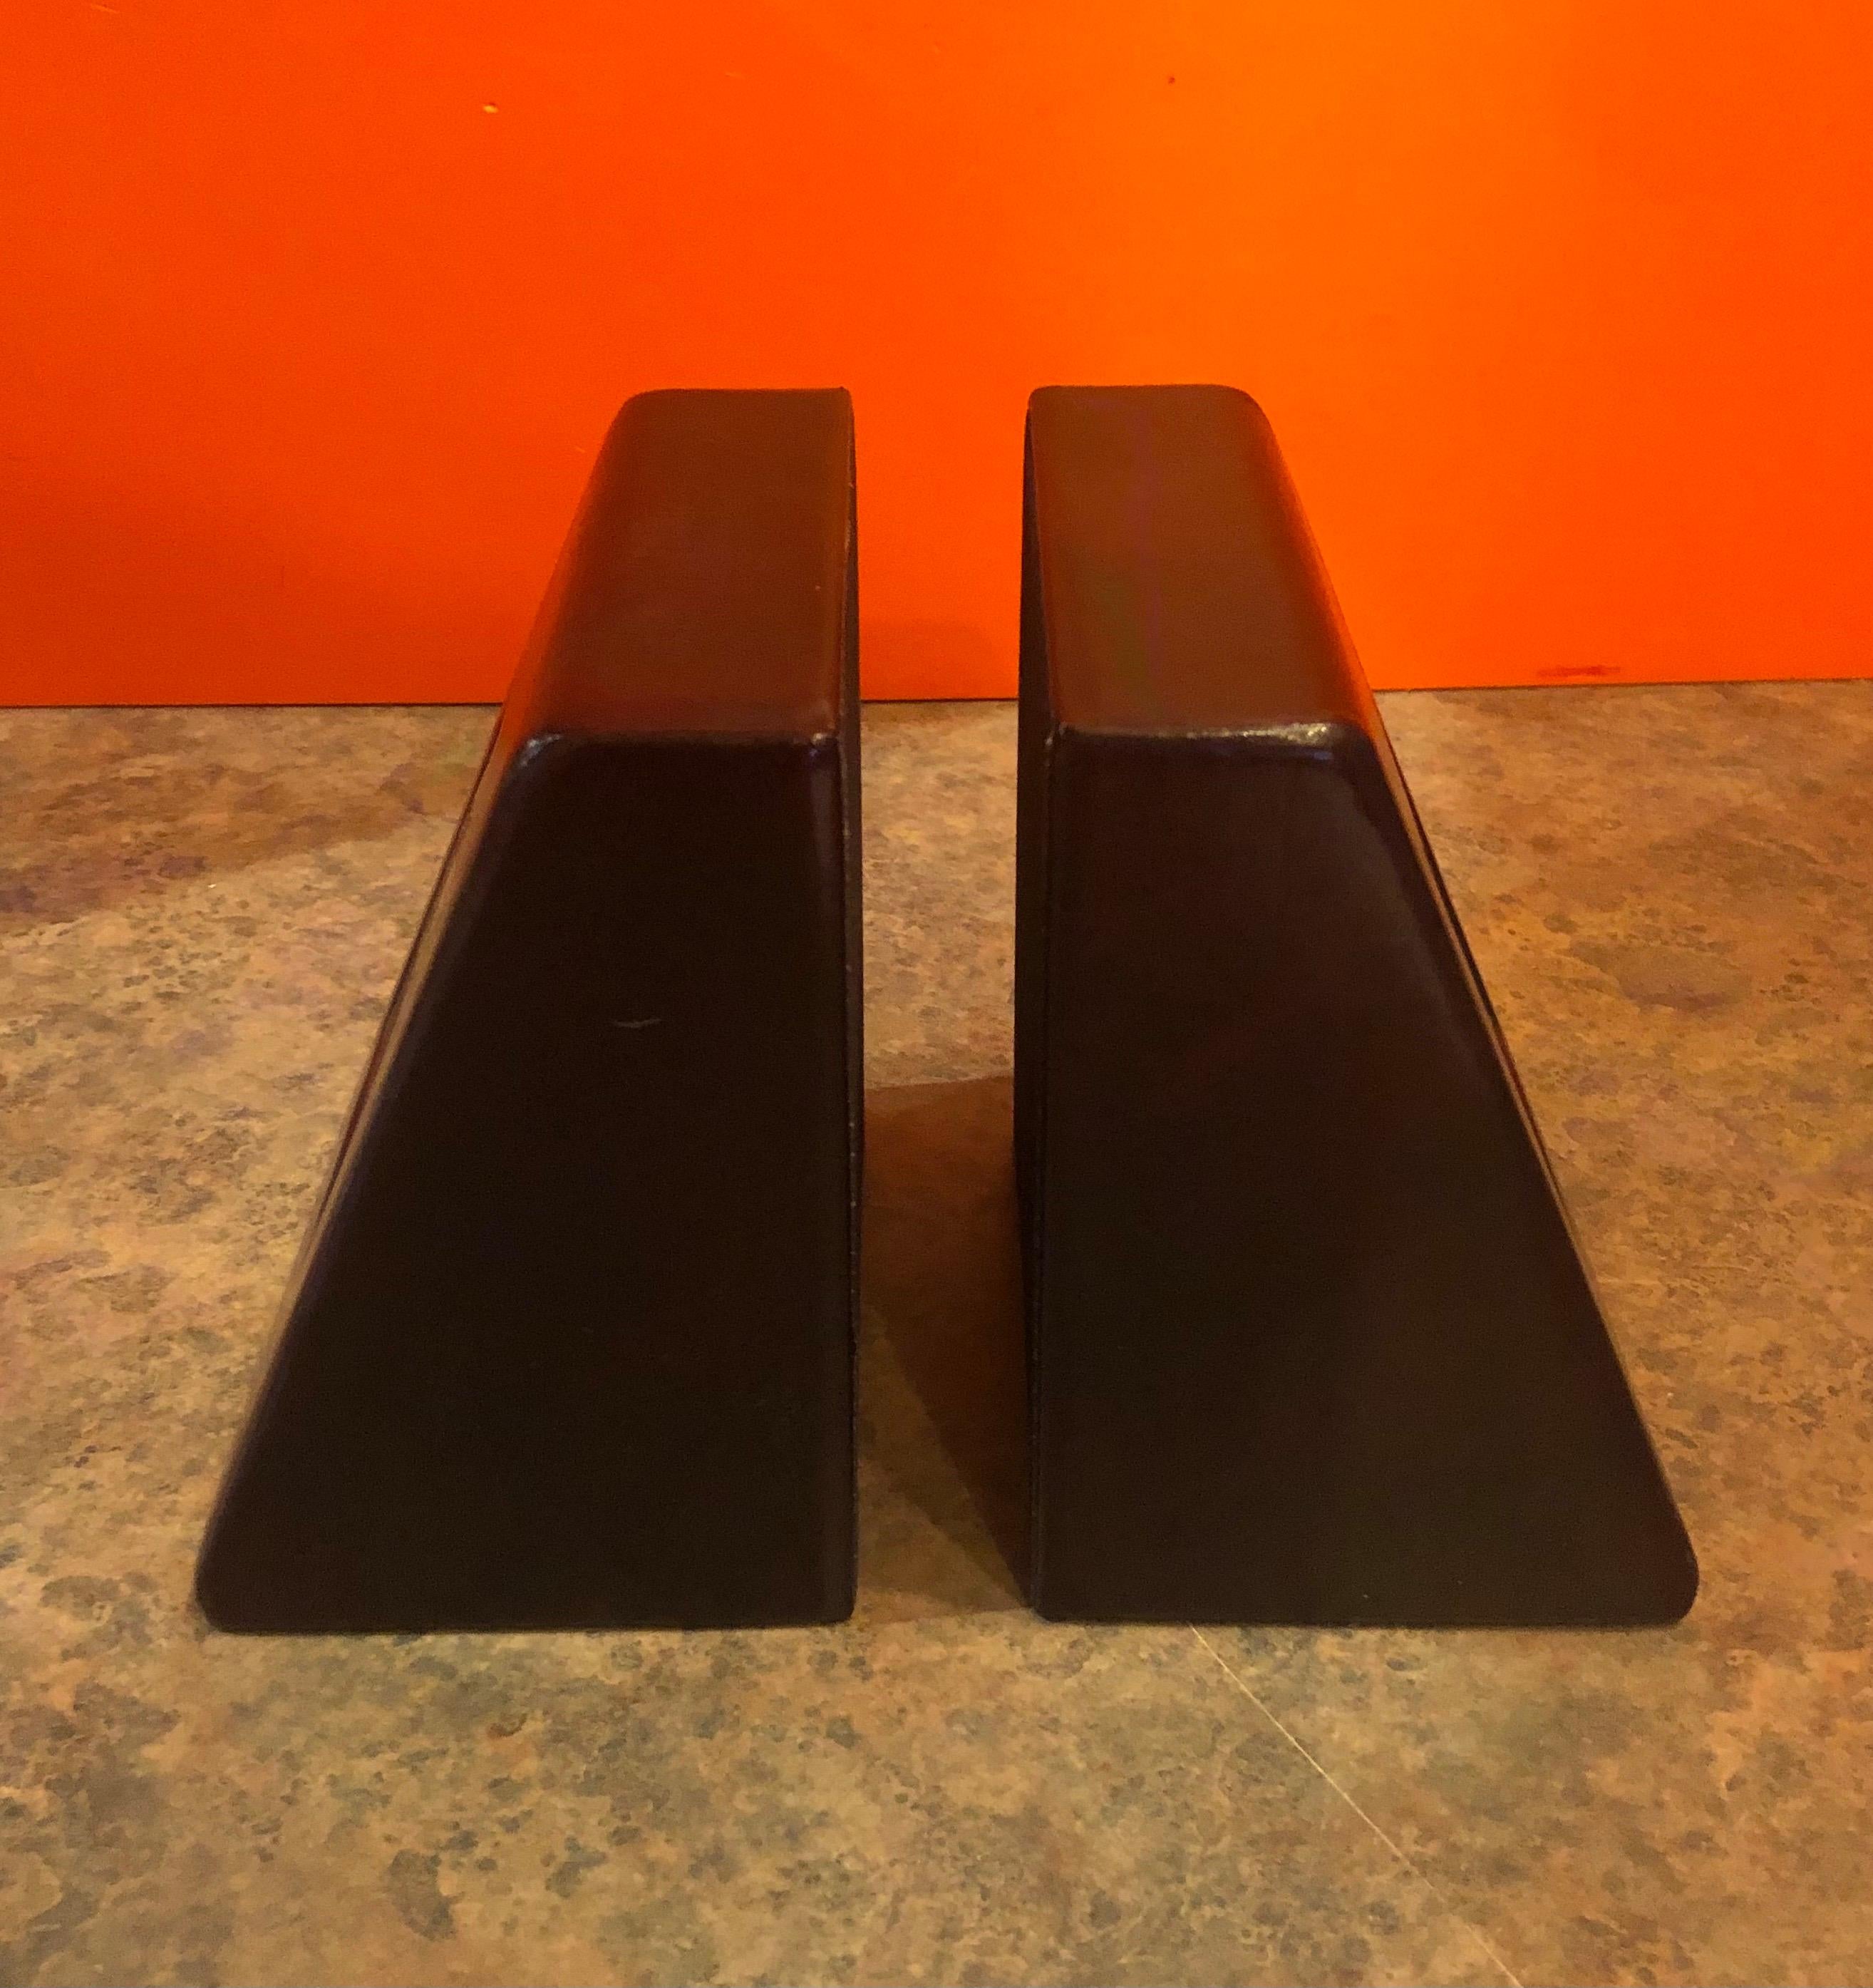 mcm bookends